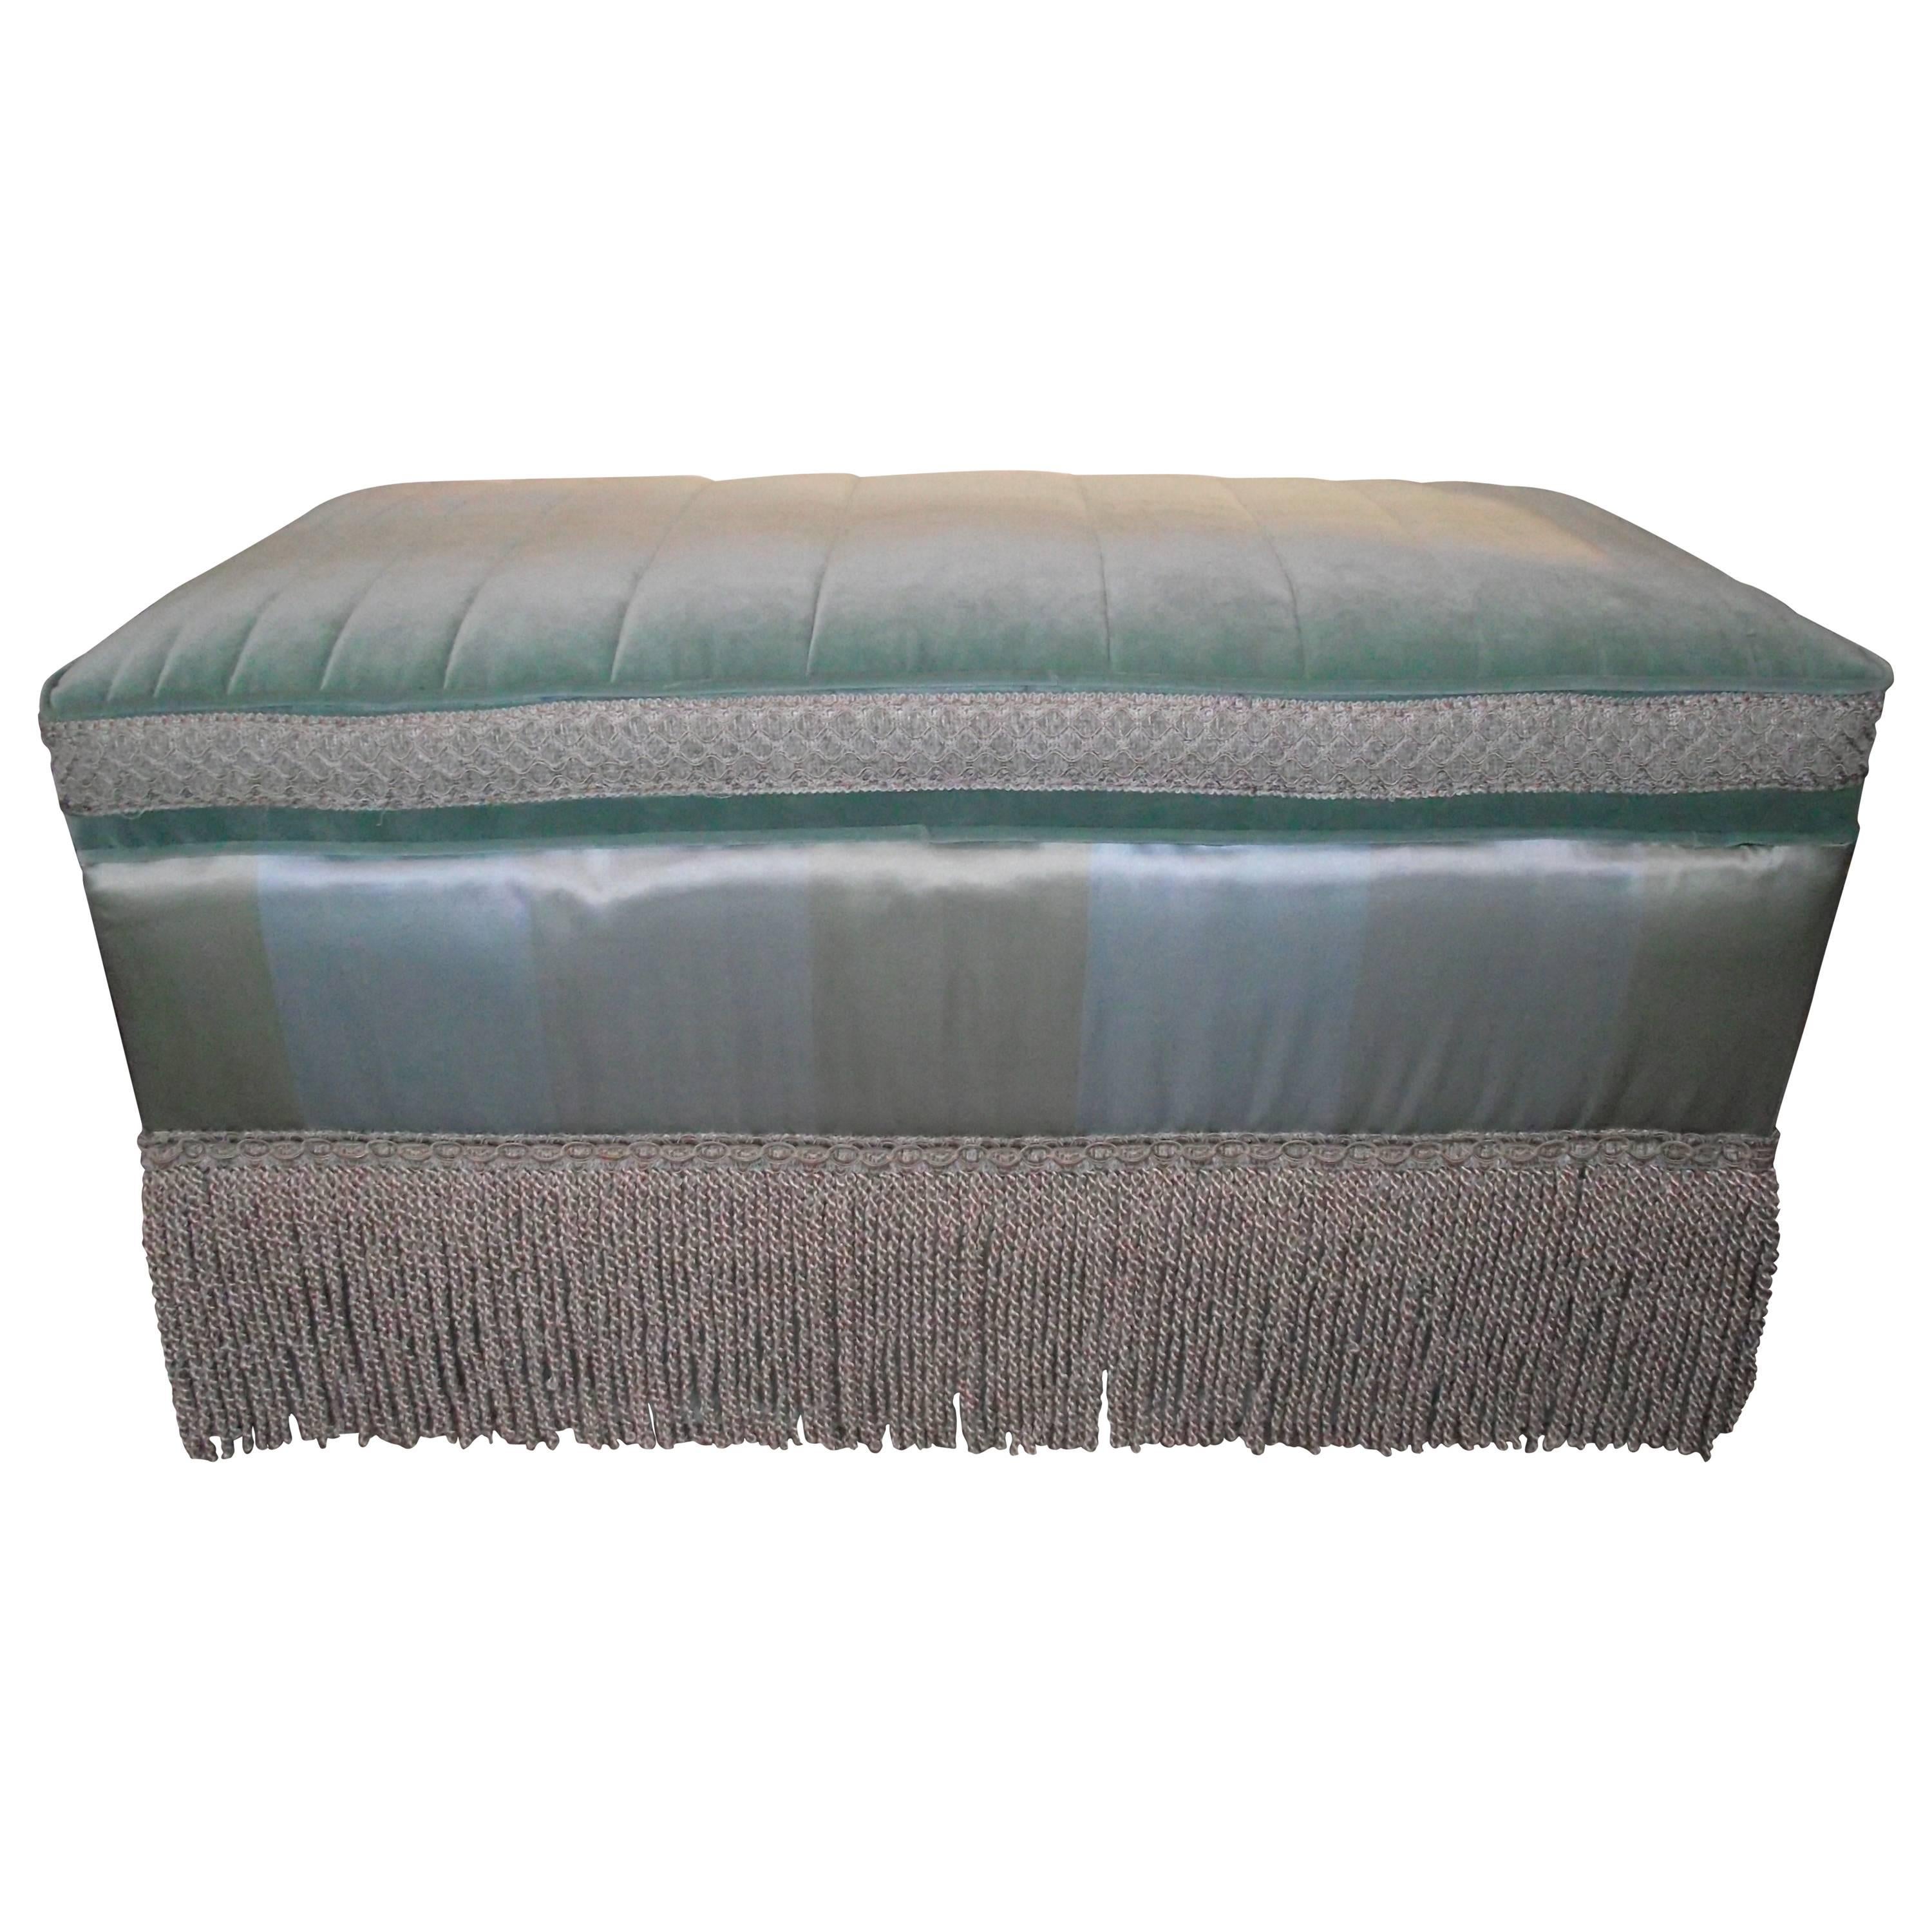 Ottoman, Cocktail Table Size in Cotton/Silk Blue and Green Stripe